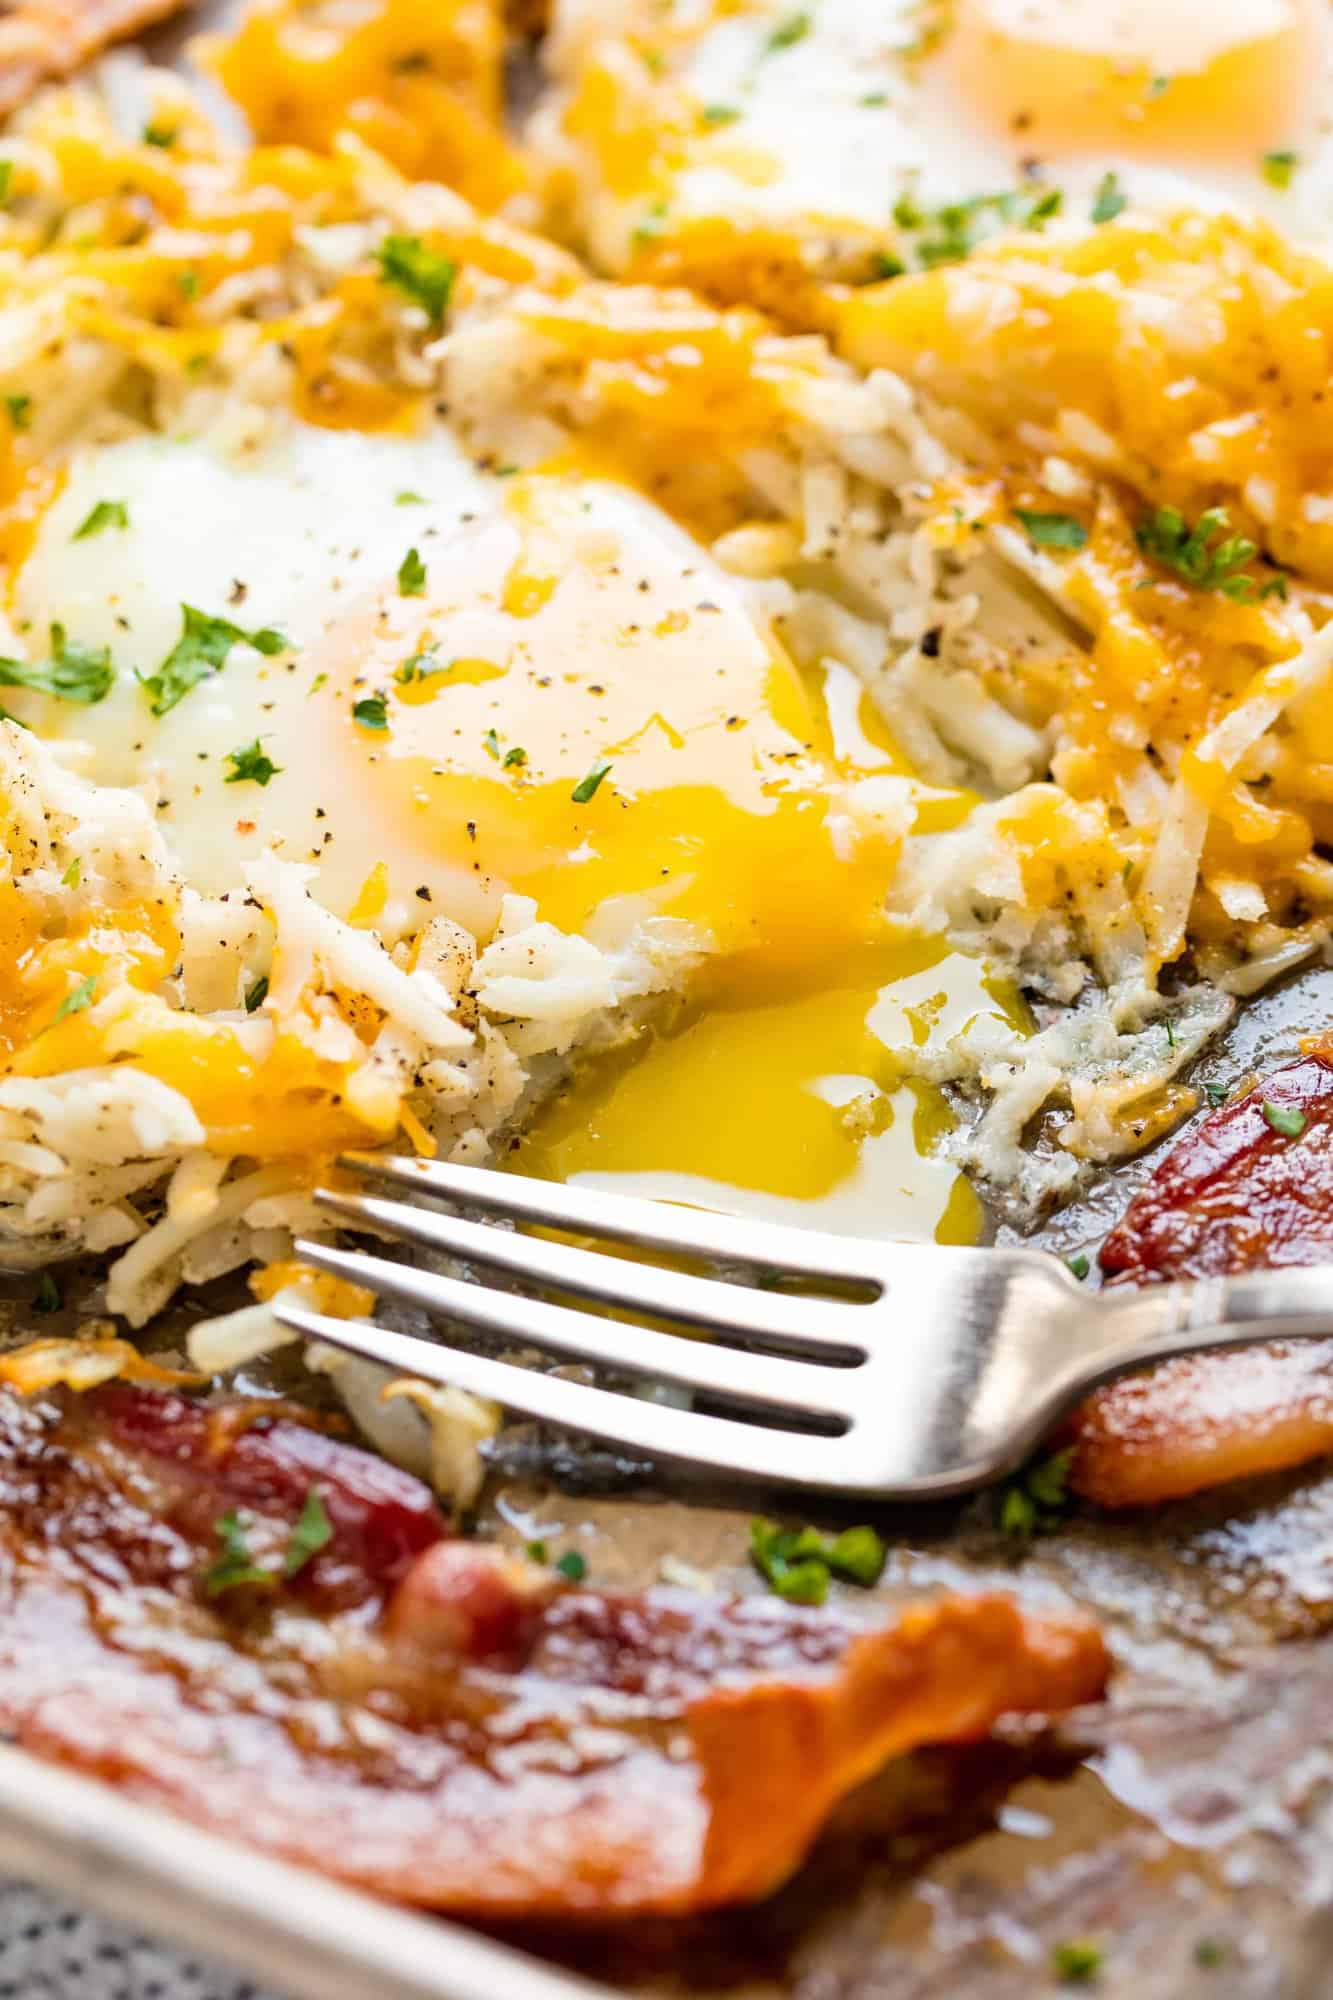 This super easy One Pan Breakfast Bake has bacon, hash browns, and eggs and takes just five minutes of hands on time to create a complete breakfast.